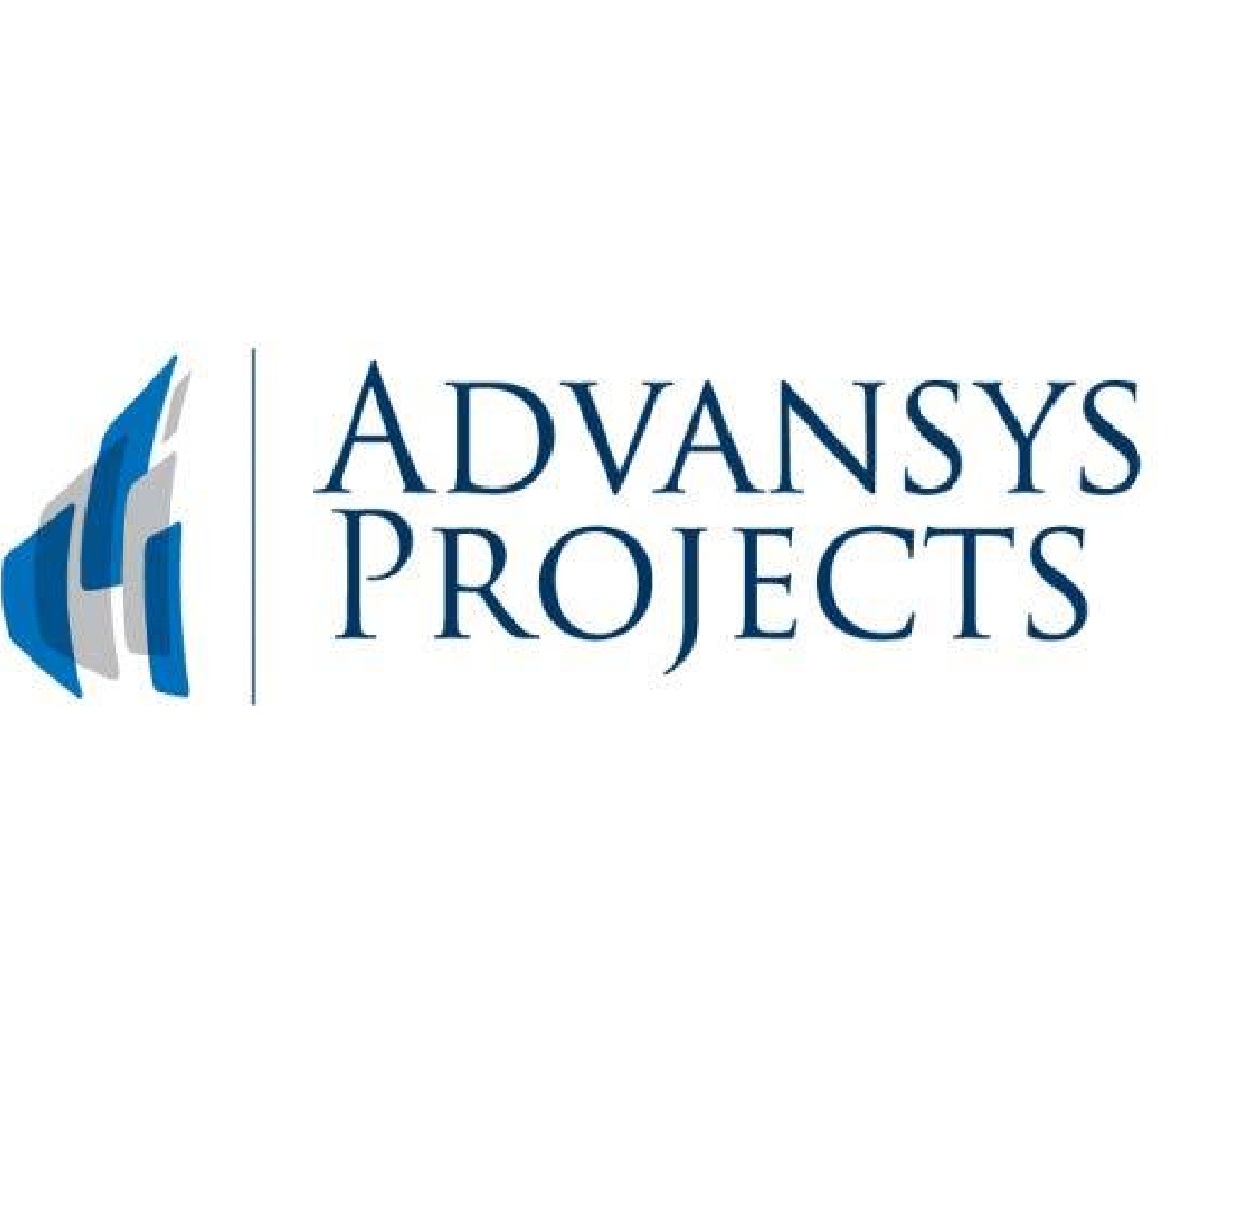 Advansys for Trading and Contracting (ATC)